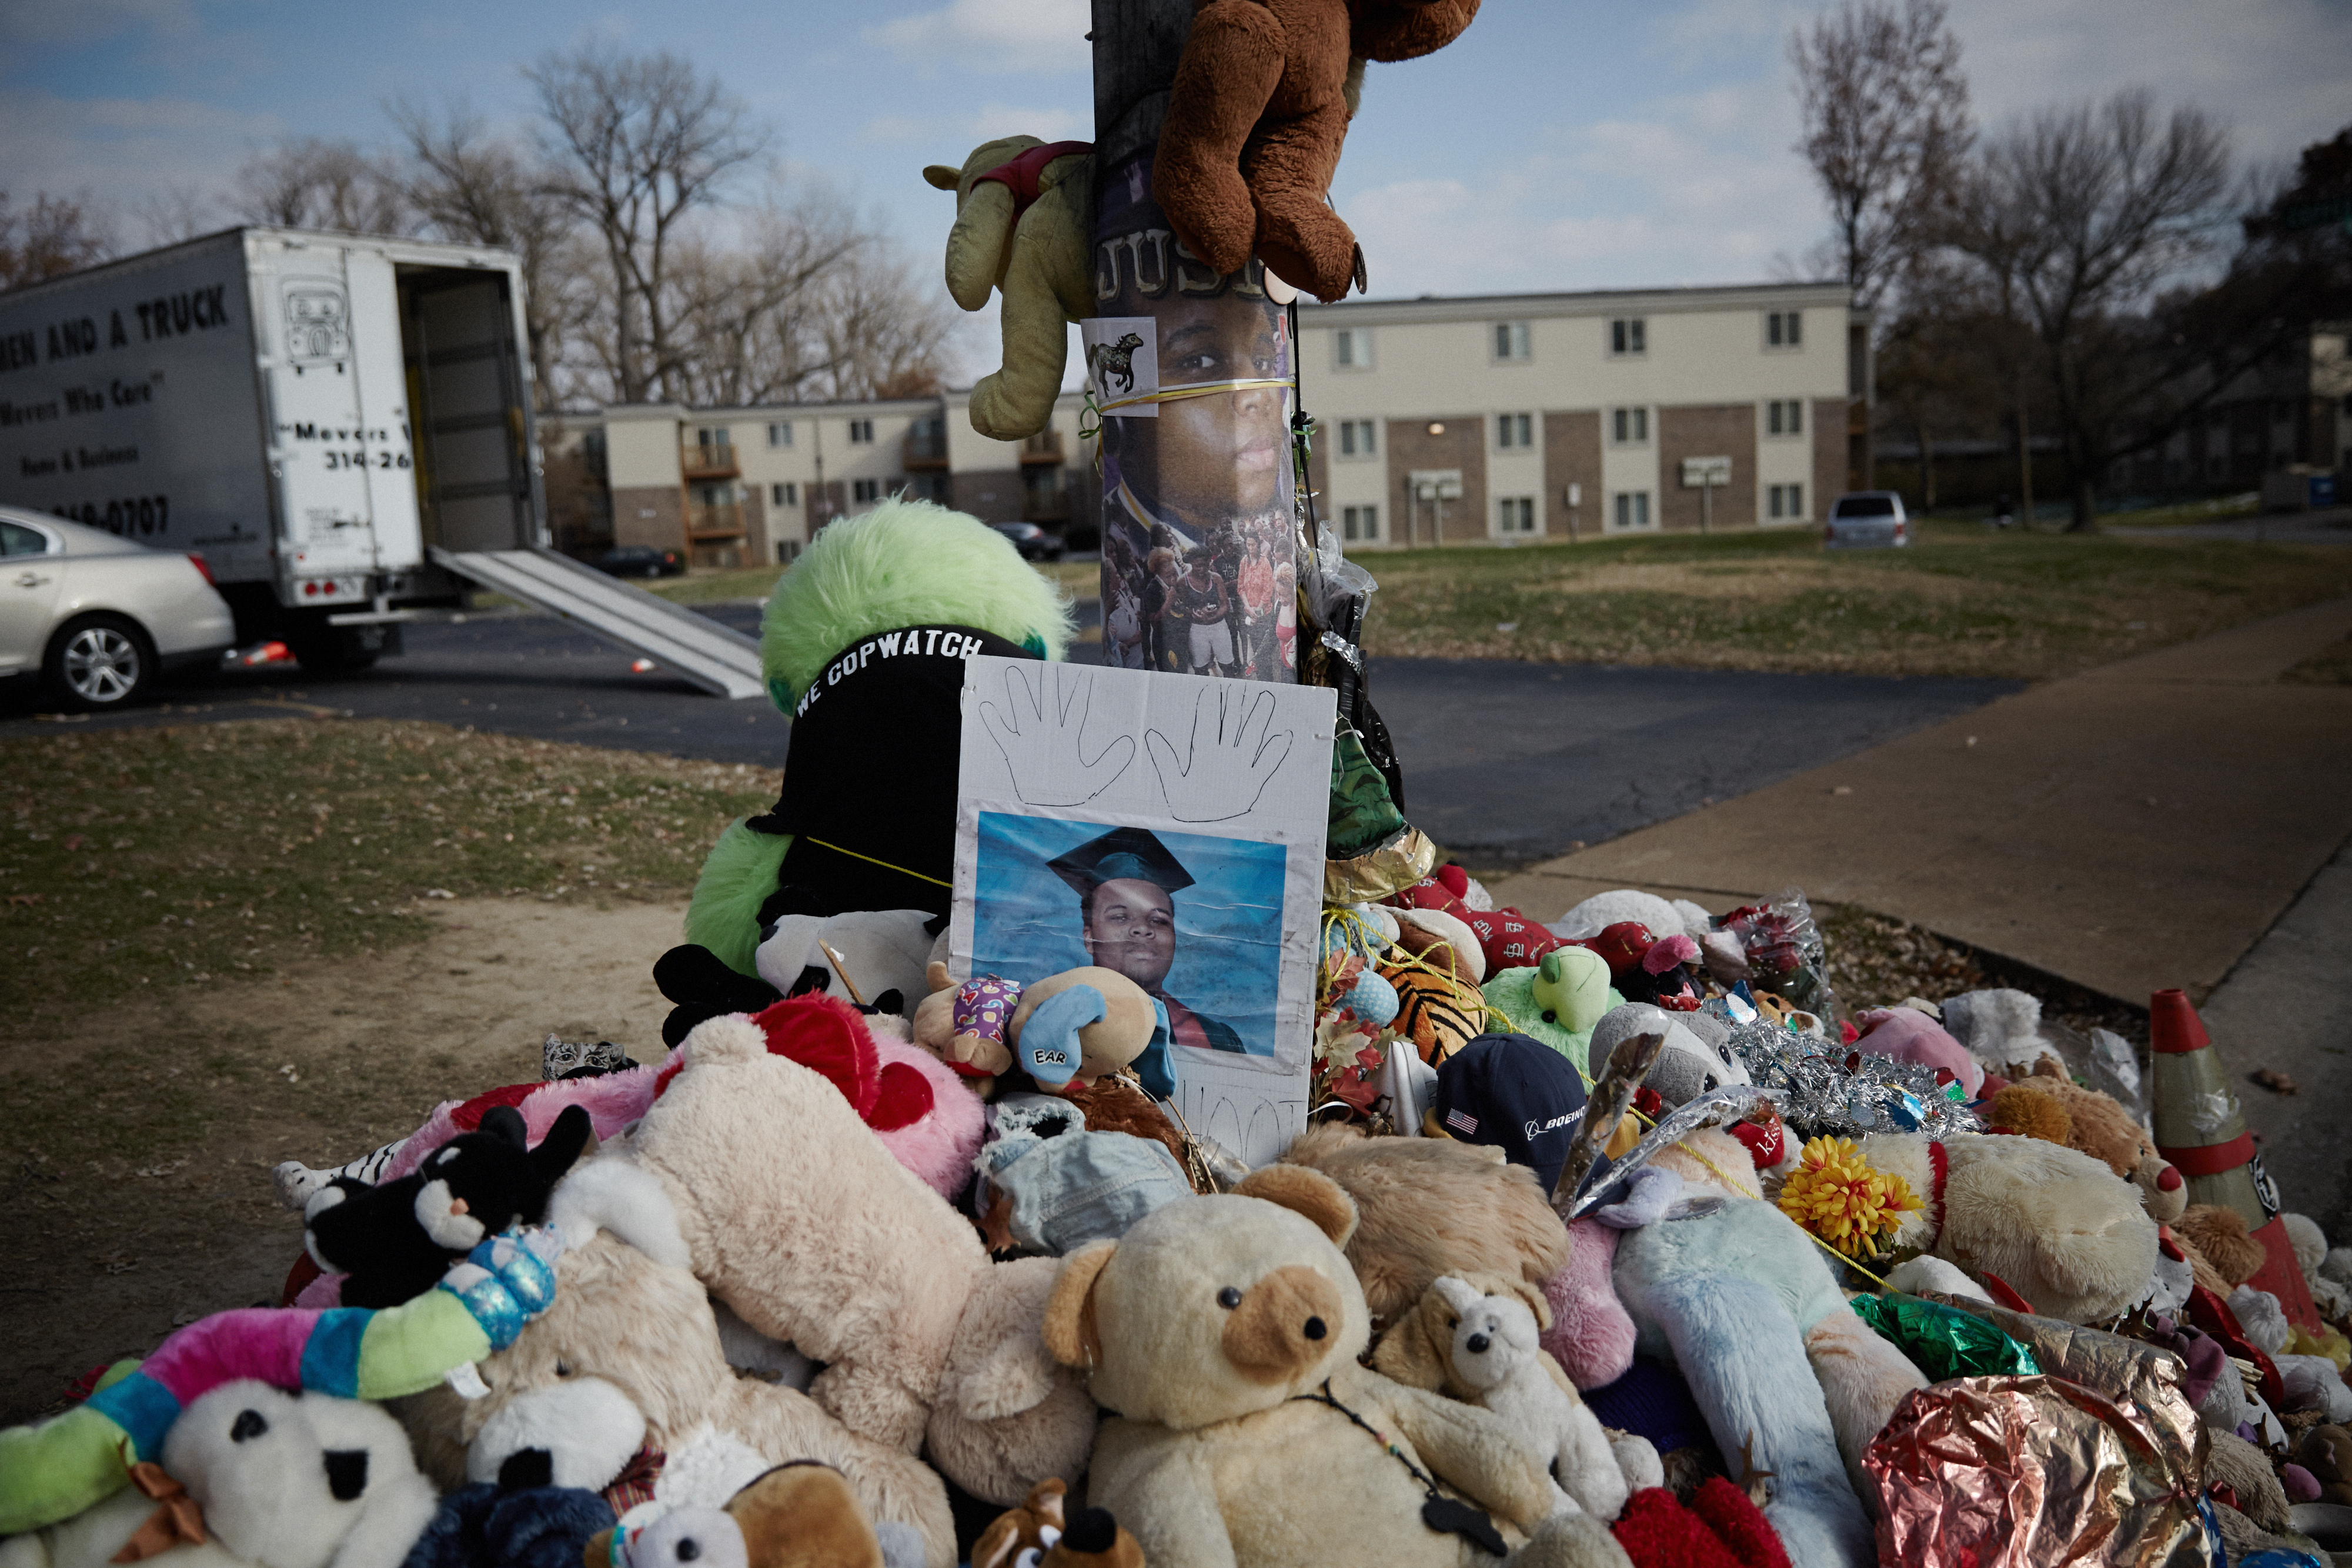 Memorial seen on November 19, 2014, for Michael Brown, a man who was shot by police officer Darren Wilson. (Sebastiano Tomada—Getty Images)